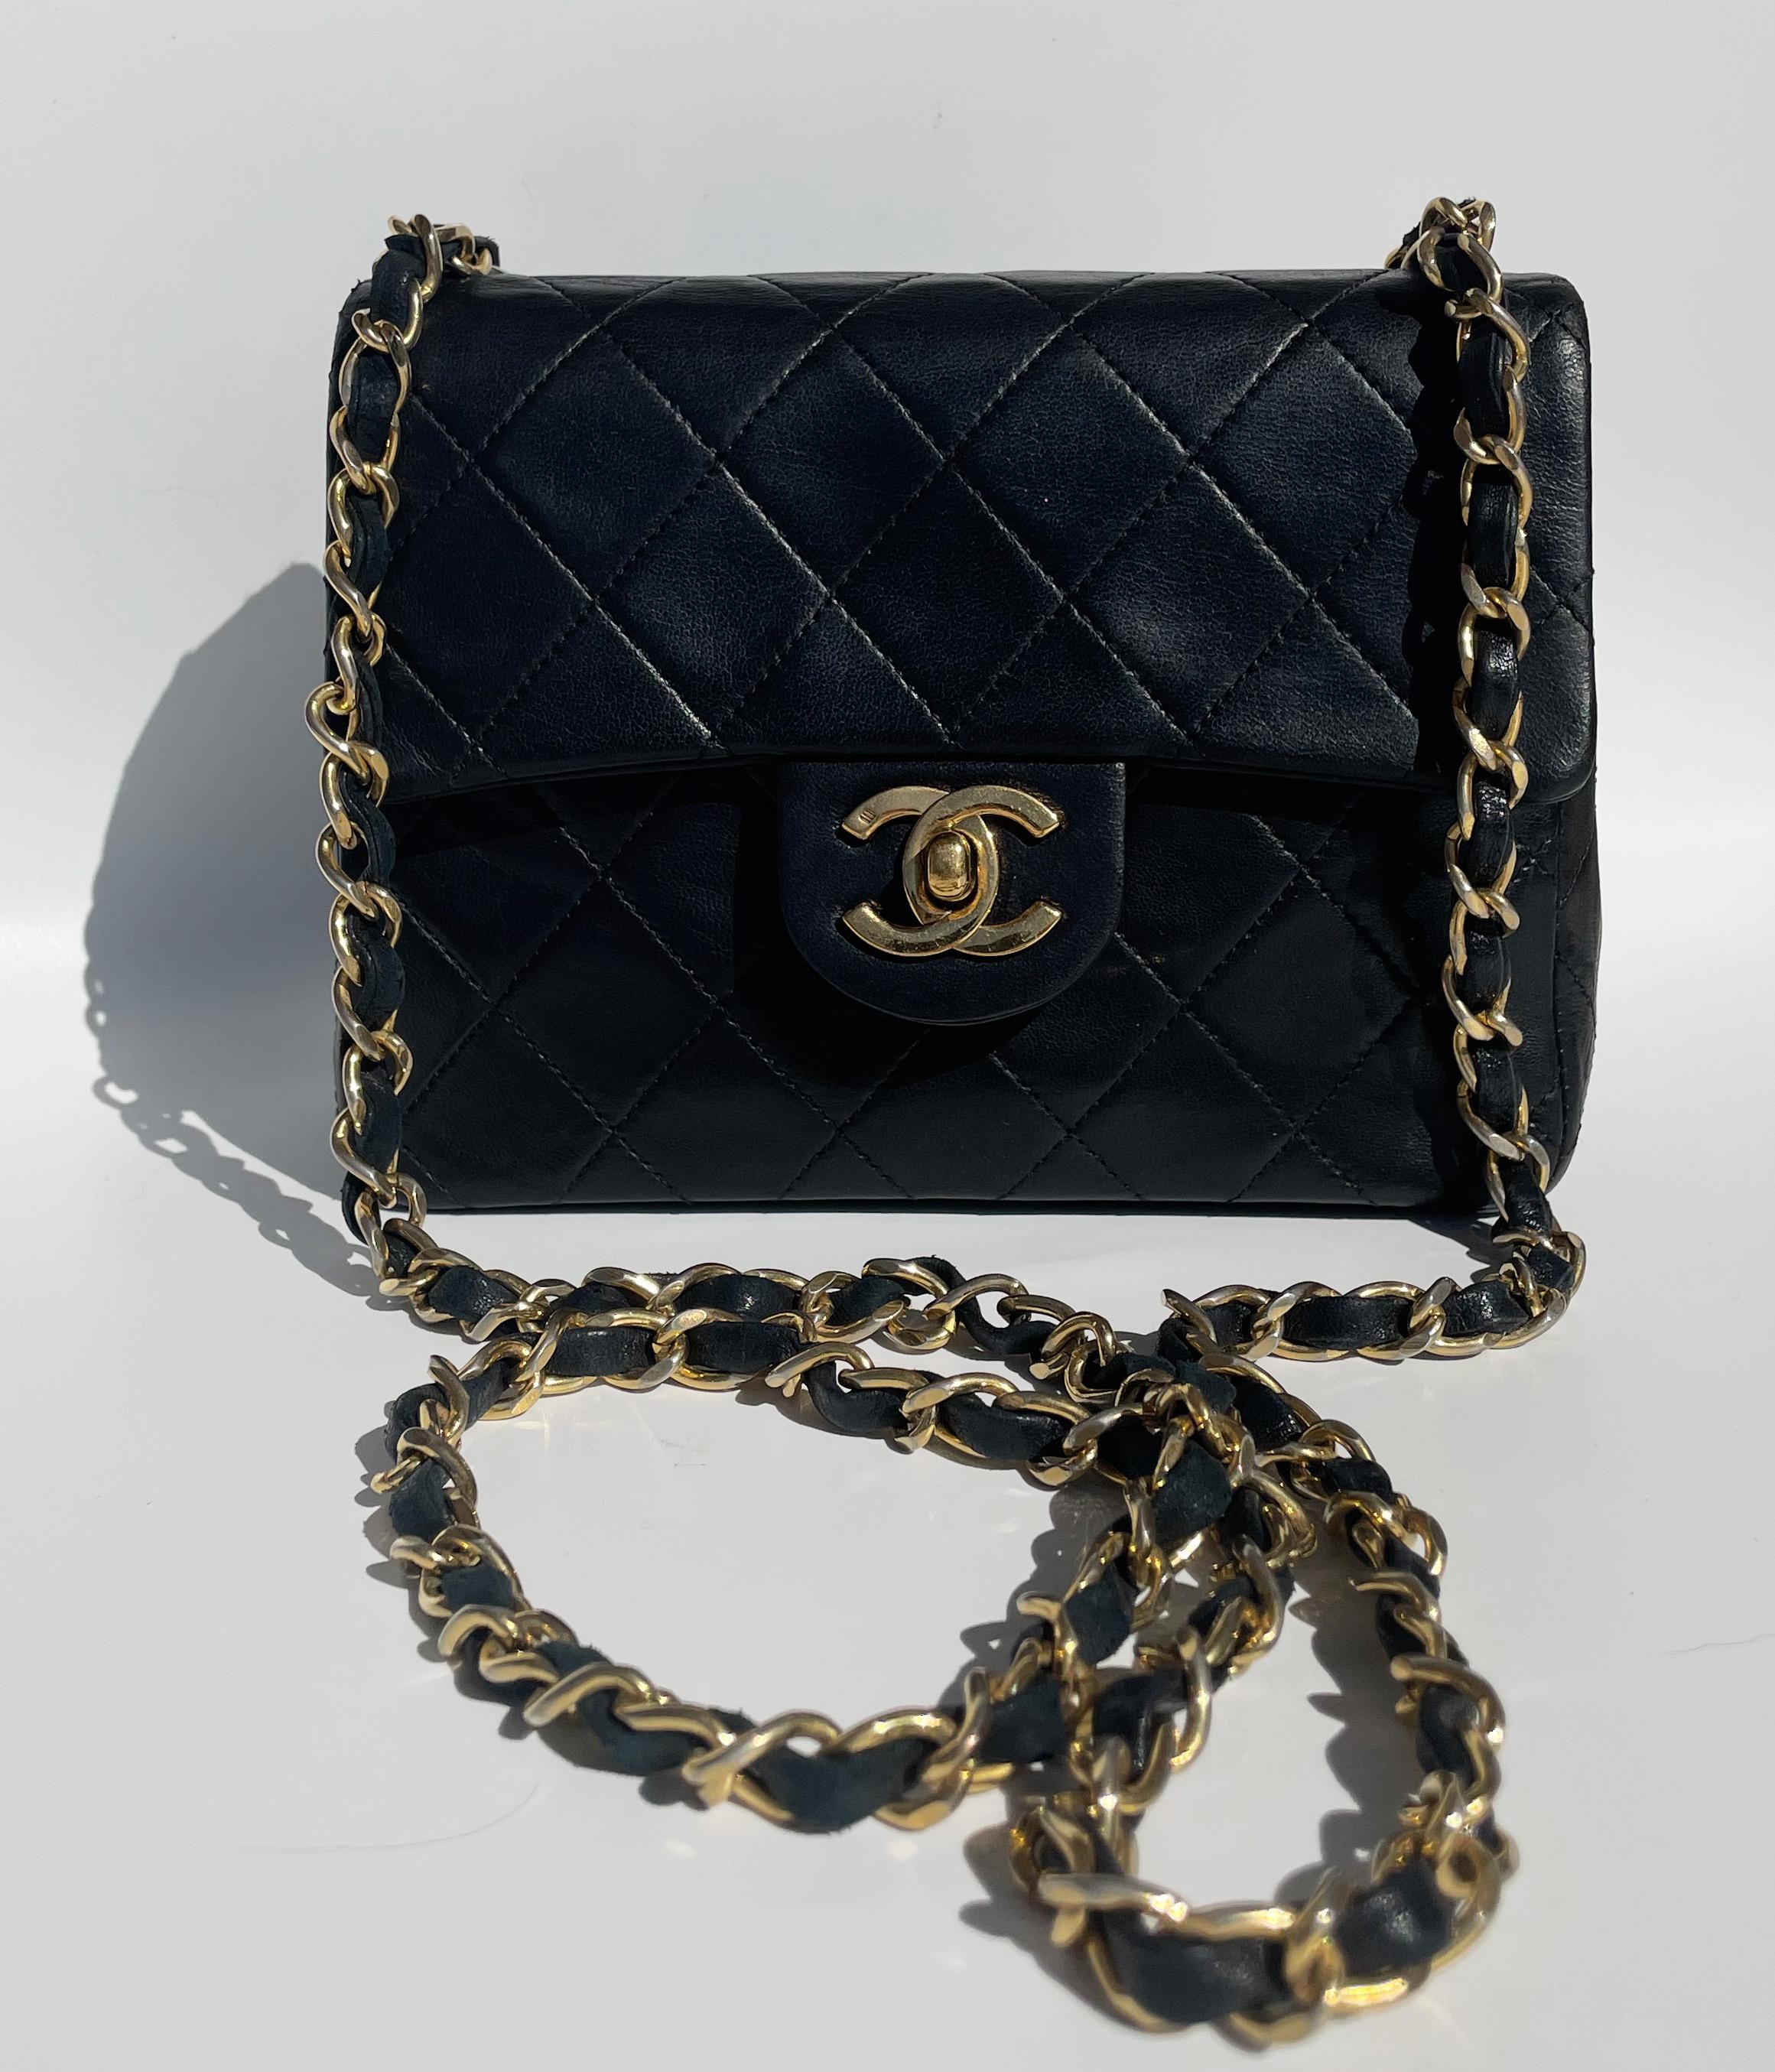 Classic Chanel Mini Timeless handbag in black quilted leather For Sale 3